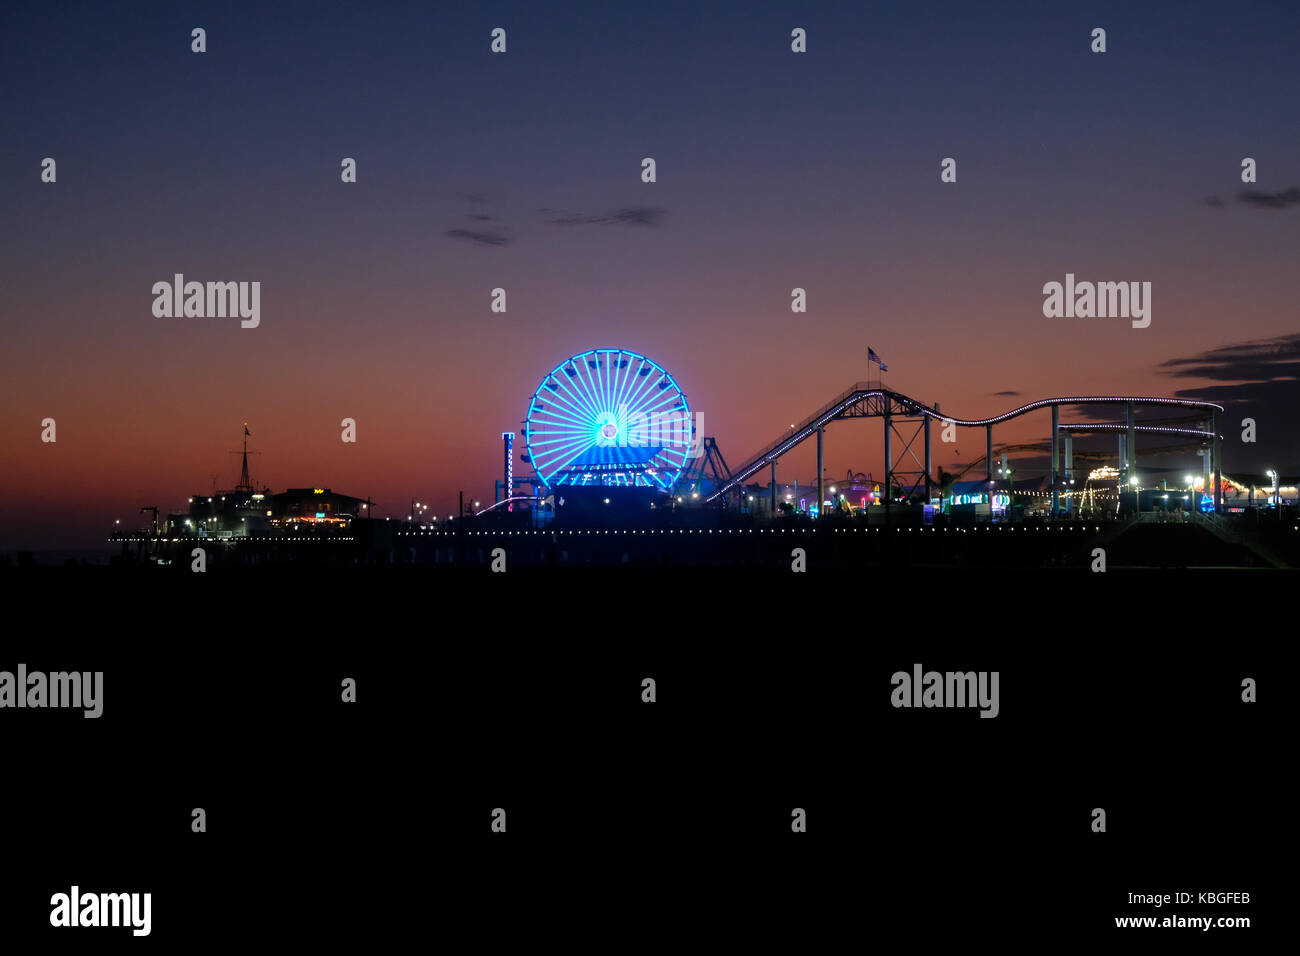 The famous Santa Monica pier and Pacific Park during a summer sunset in Los Angeles, California, USA. Stock Photo